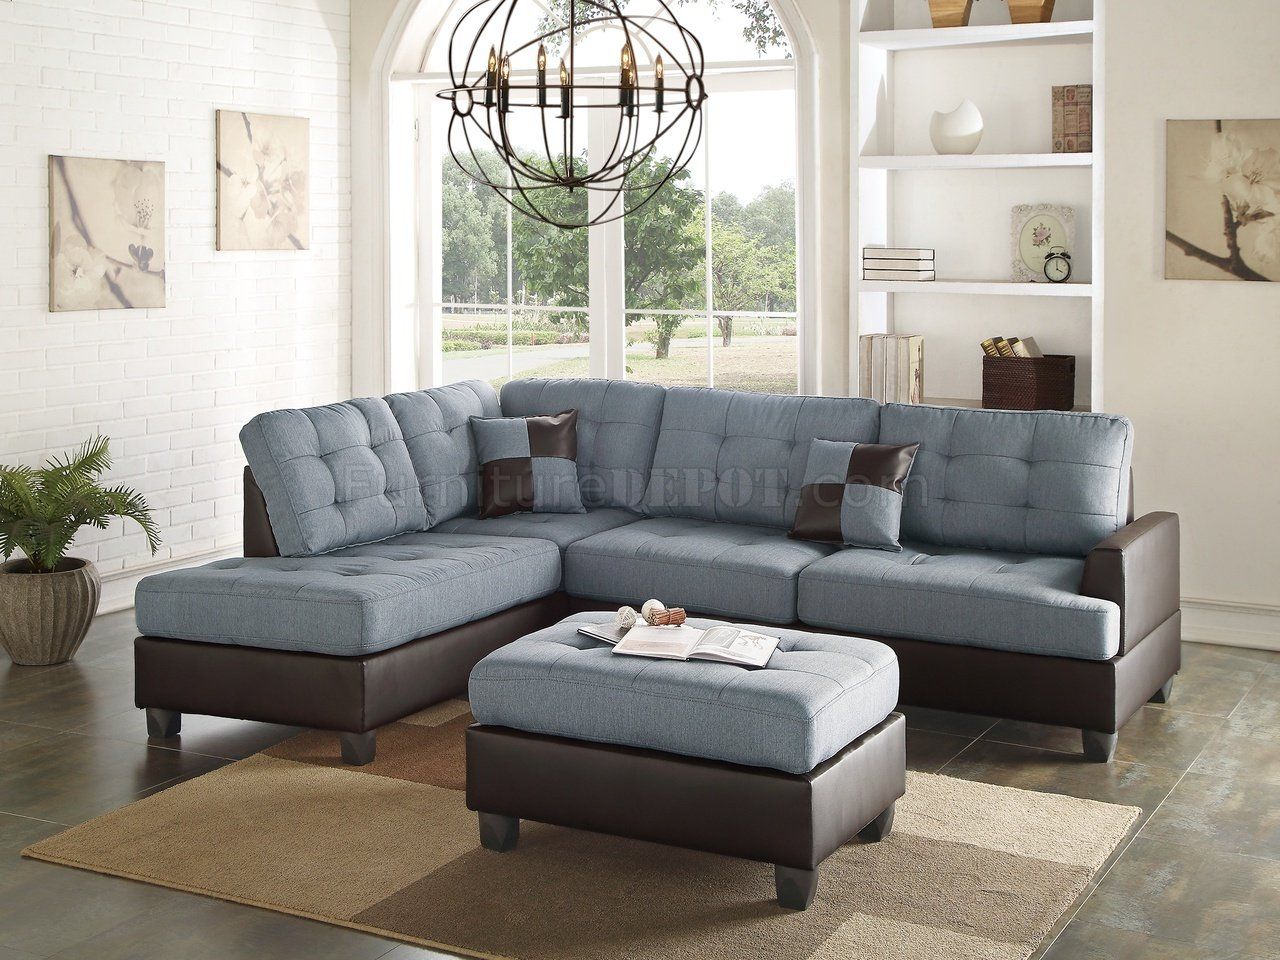 F6858 Sectional Sofa 3Pc In Grey Fabricboss Inside Sectional Sofas In Gray (View 2 of 15)